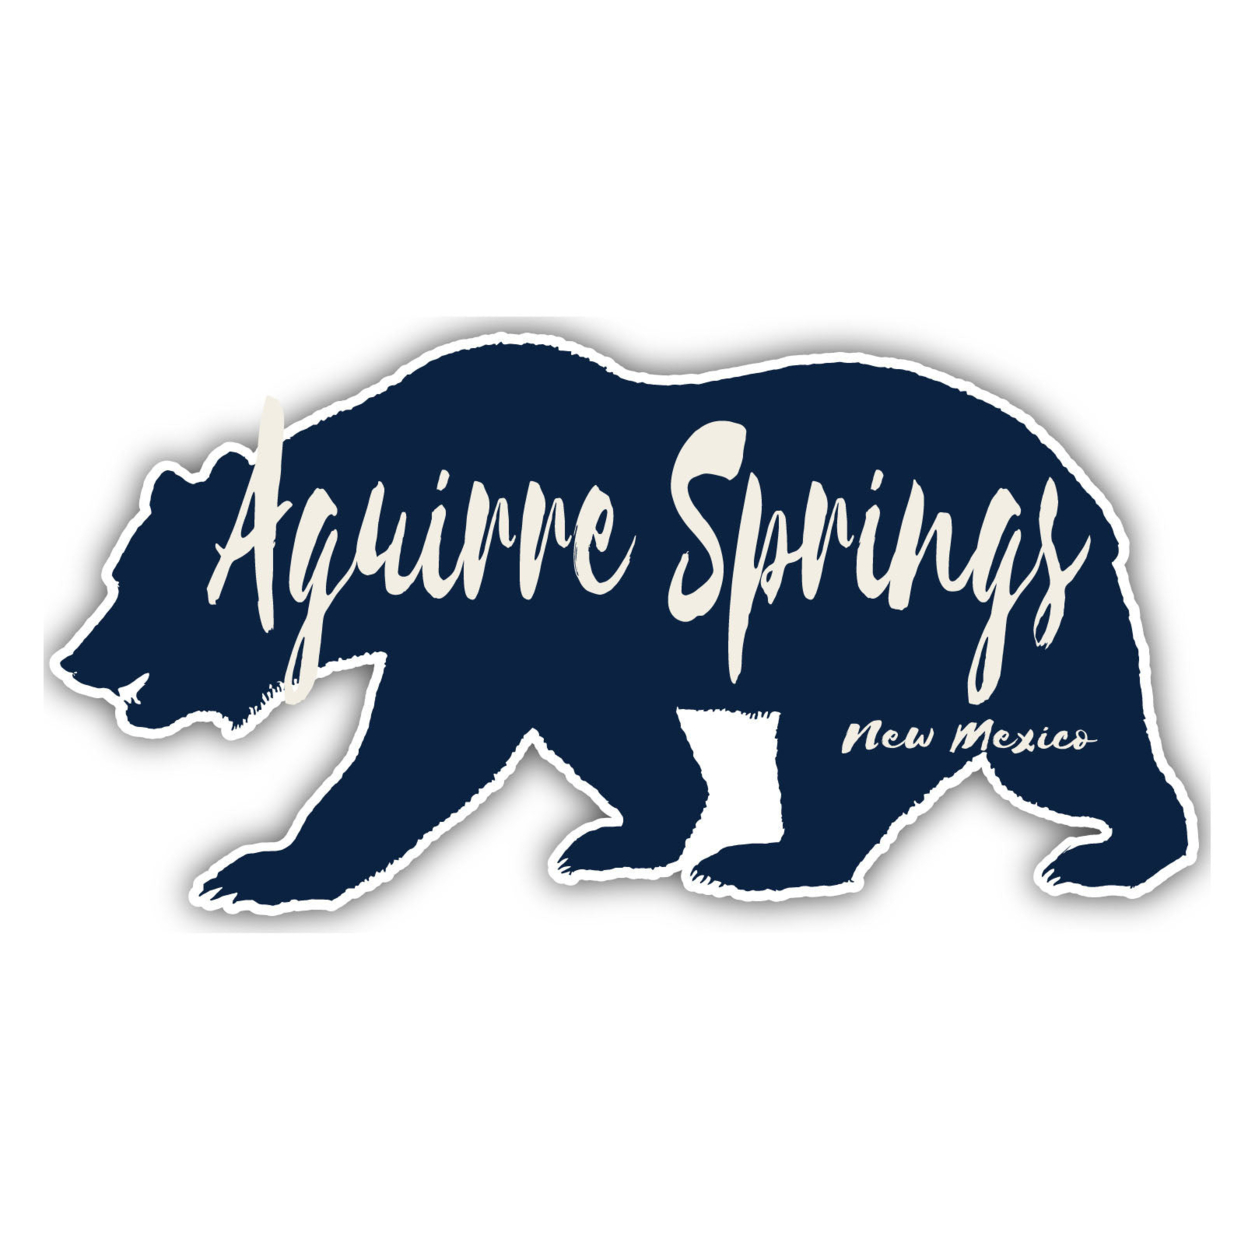 Aguirre Springs New Mexico Souvenir Decorative Stickers (Choose Theme And Size) - 4-Pack, 2-Inch, Bear